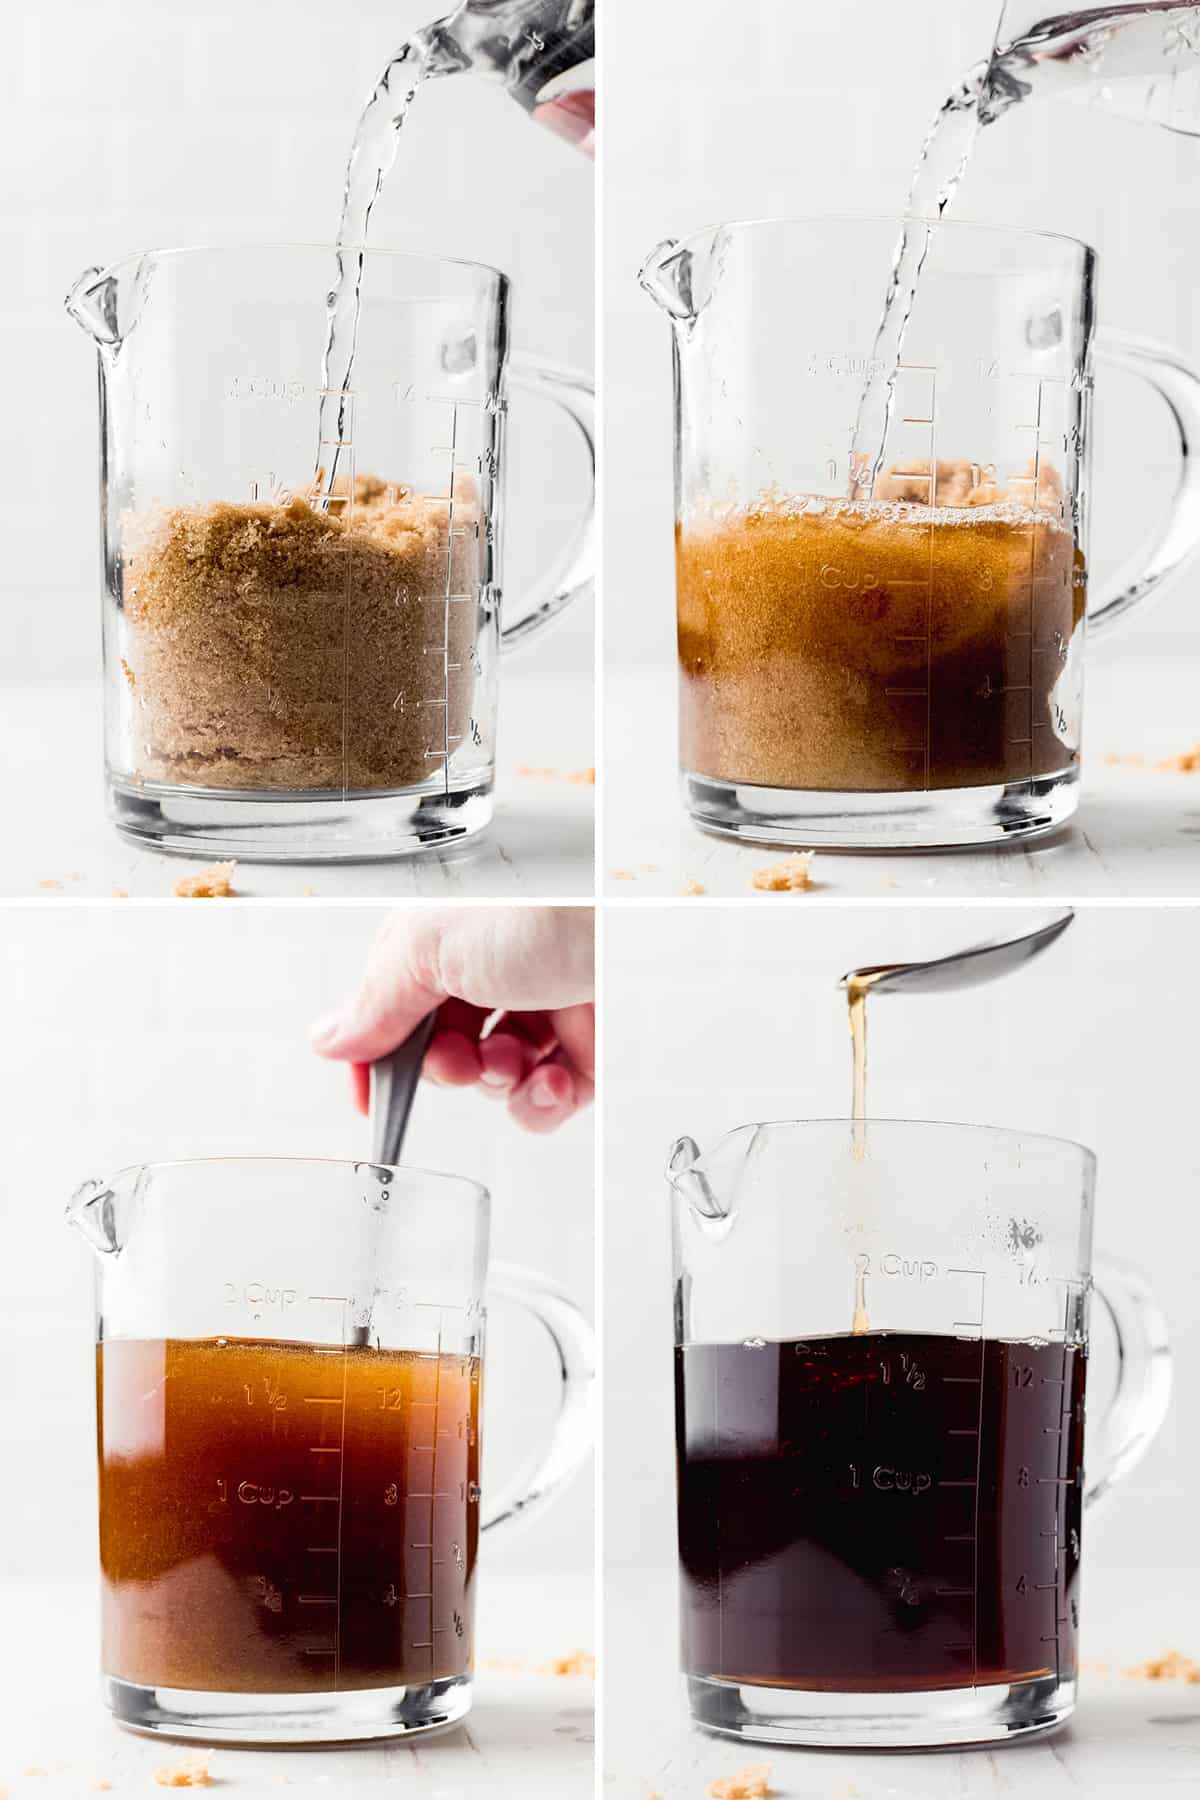 Brown sugar and water in a glass measuring cup, stirred with spoon.